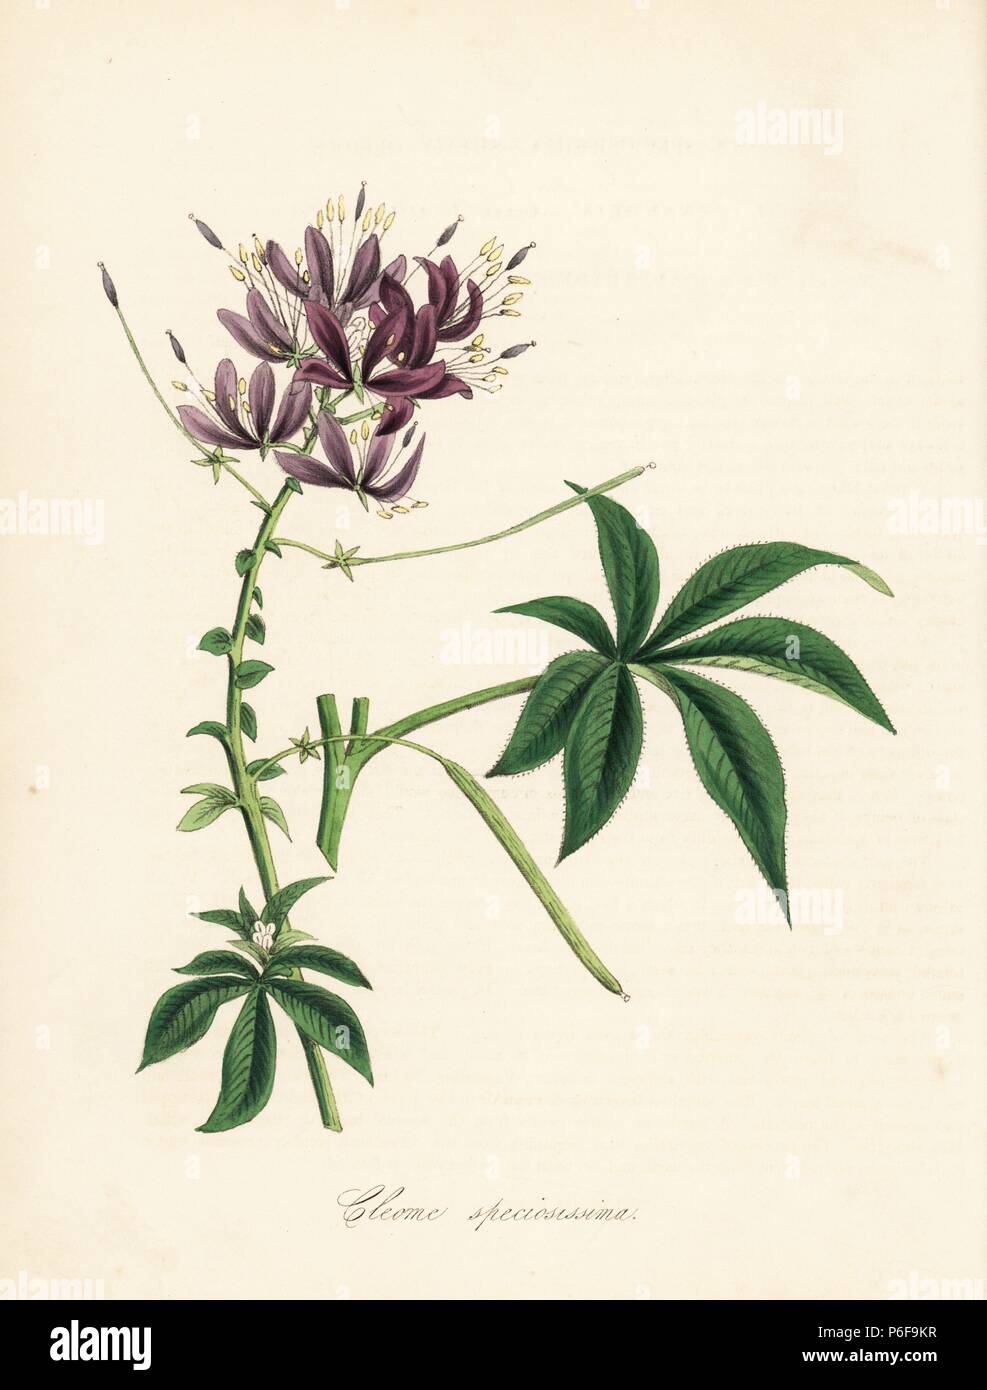 Showy or garden spiderflower, Cleoserrata speciosa (Shewy cleome, Cleome speciosissima). Handcoloured zincograph by C. Chabot drawn by Miss M. A. Burnett from her 'Plantae Utiliores: or Illustrations of Useful Plants,' Whittaker, London, 1842. Miss Burnett drew the botanical illustrations, but the text was chiefly by her late brother, British botanist Gilbert Thomas Burnett (1800-1835). Stock Photo